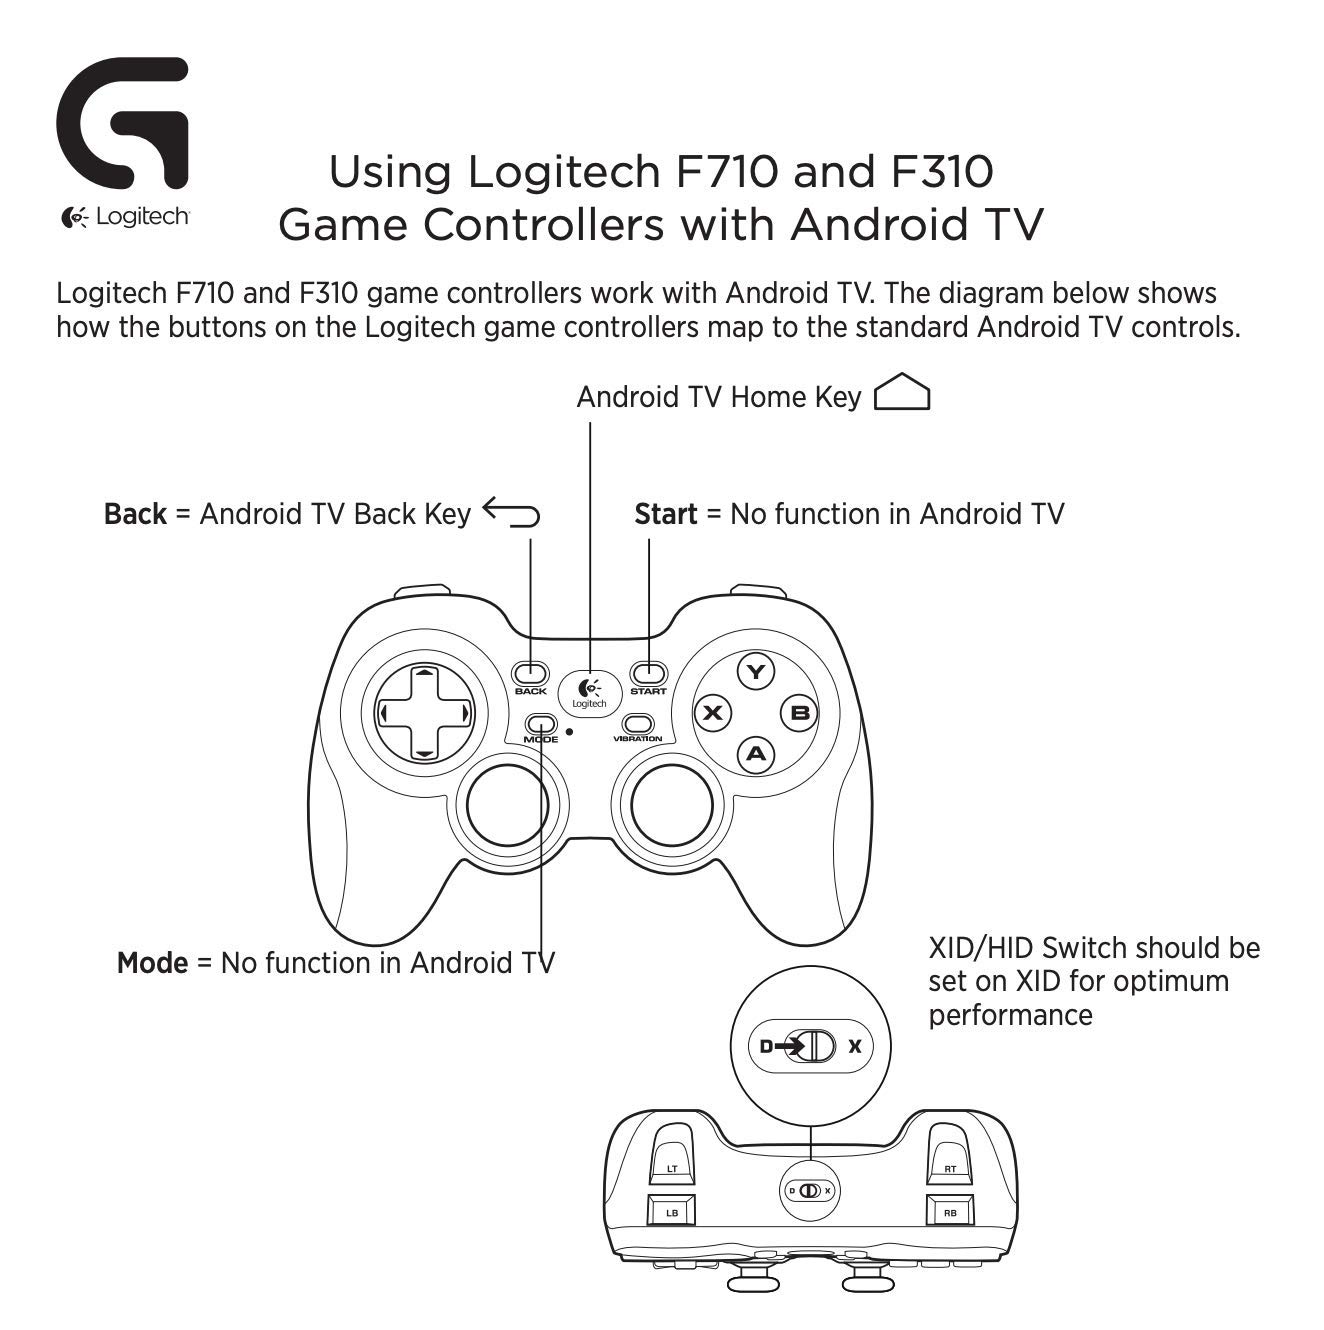  Logitech G F310 Wired Gamepad Controller Console Like Layout 4  Switch D-Pad PC - Blue/Black : Video Games